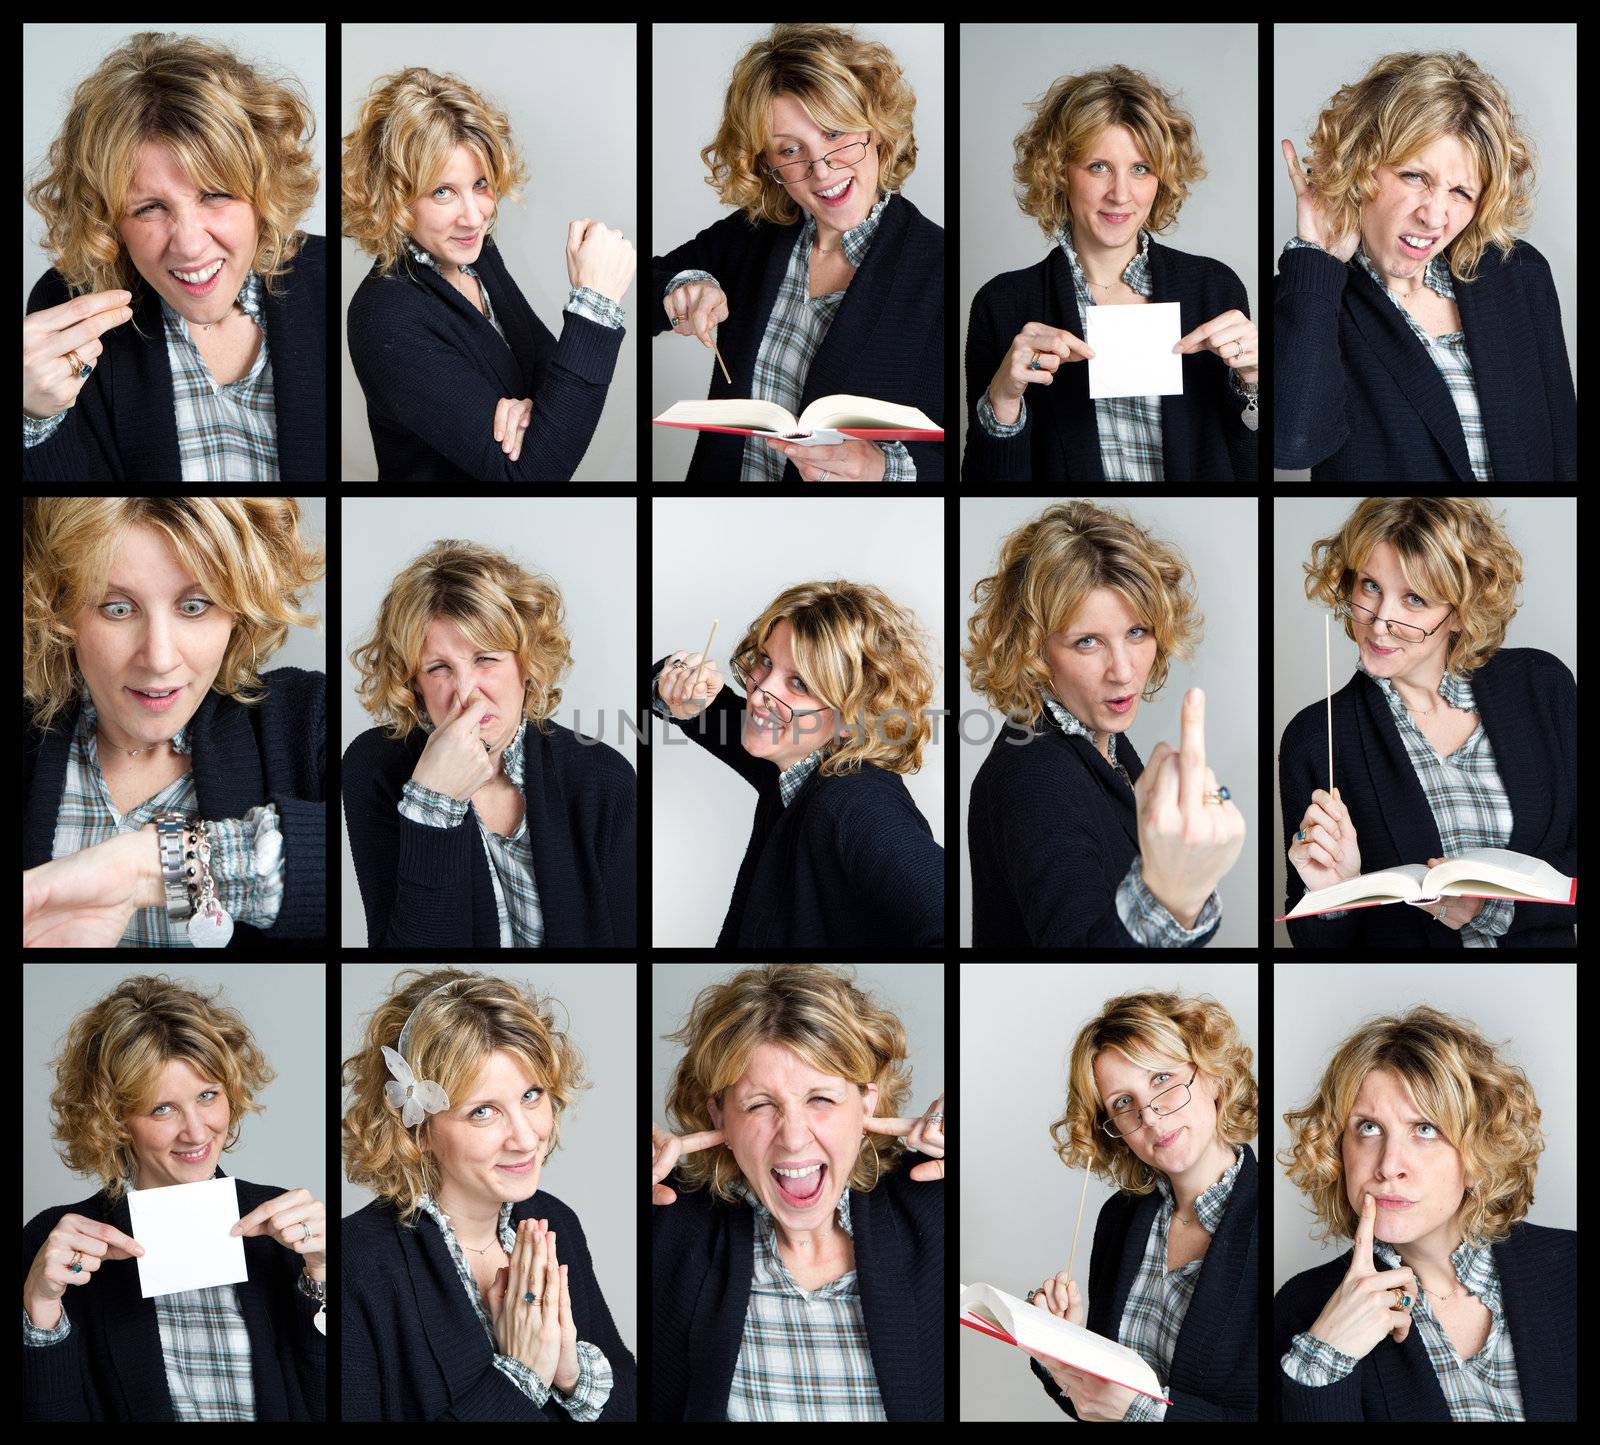 Collage of the same woman making diferent expressions